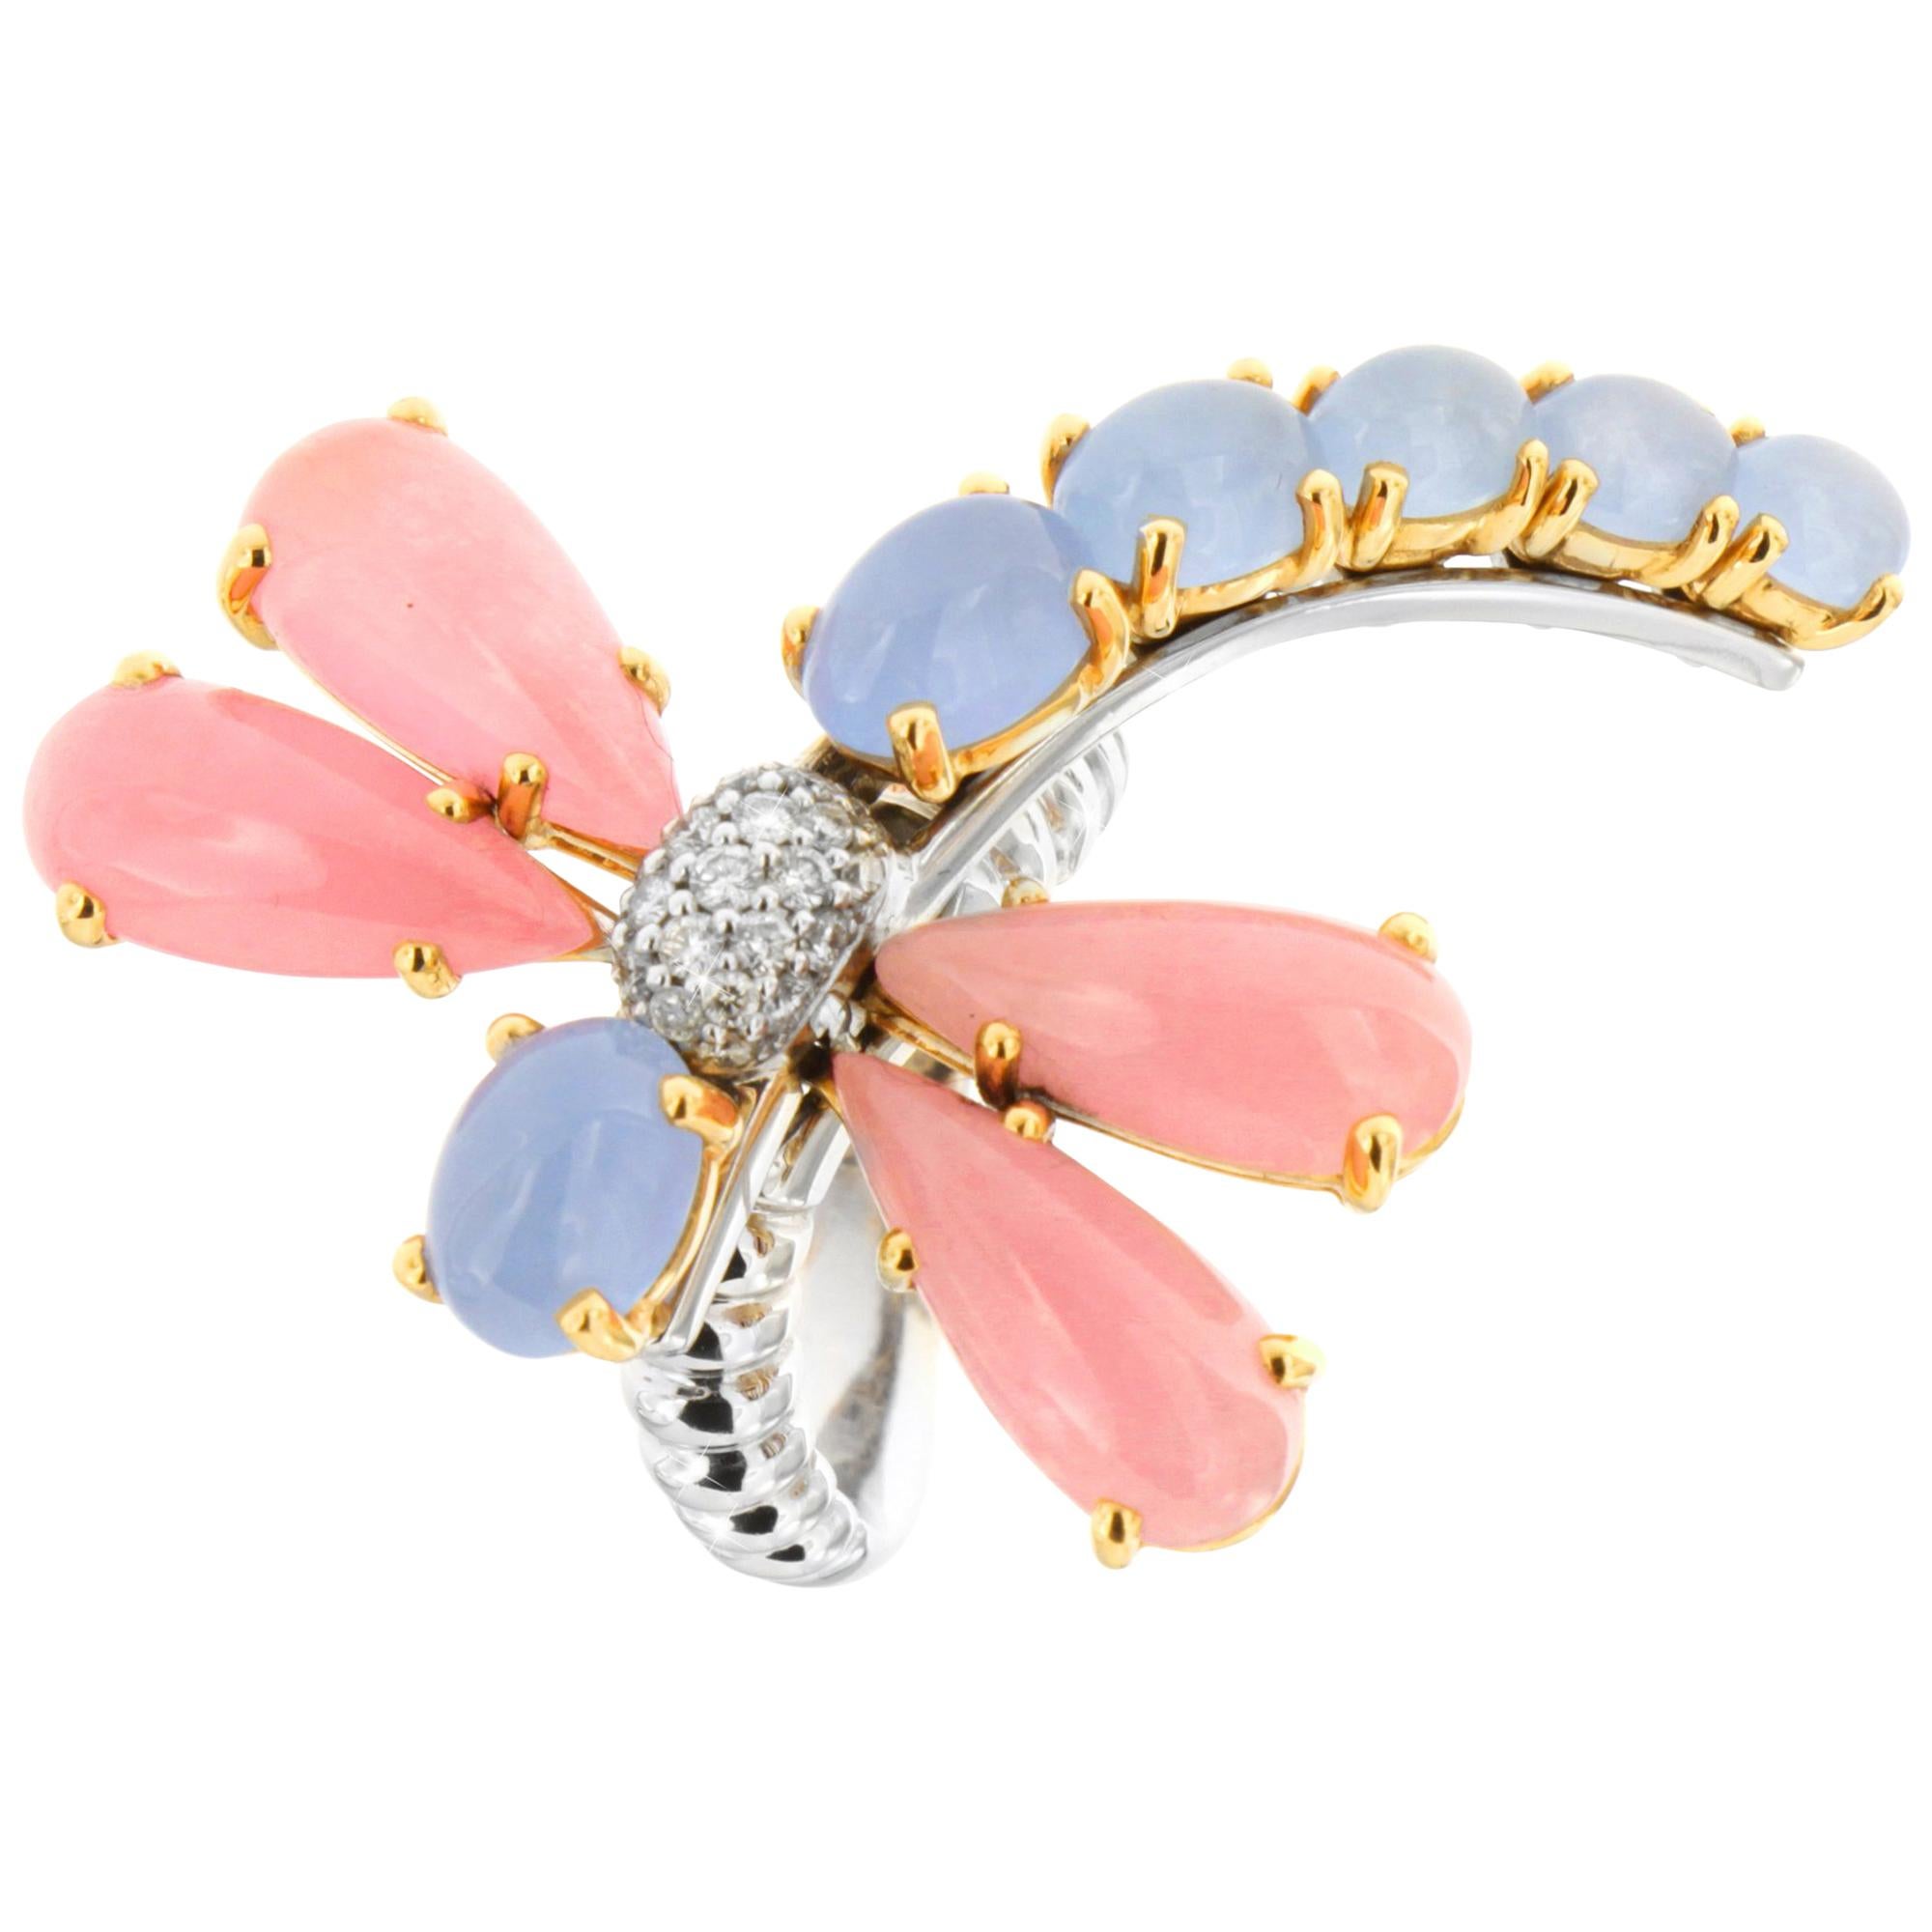 Zorab Creation, the Jade and Diamond Pastel Dragonfly Motion Ring